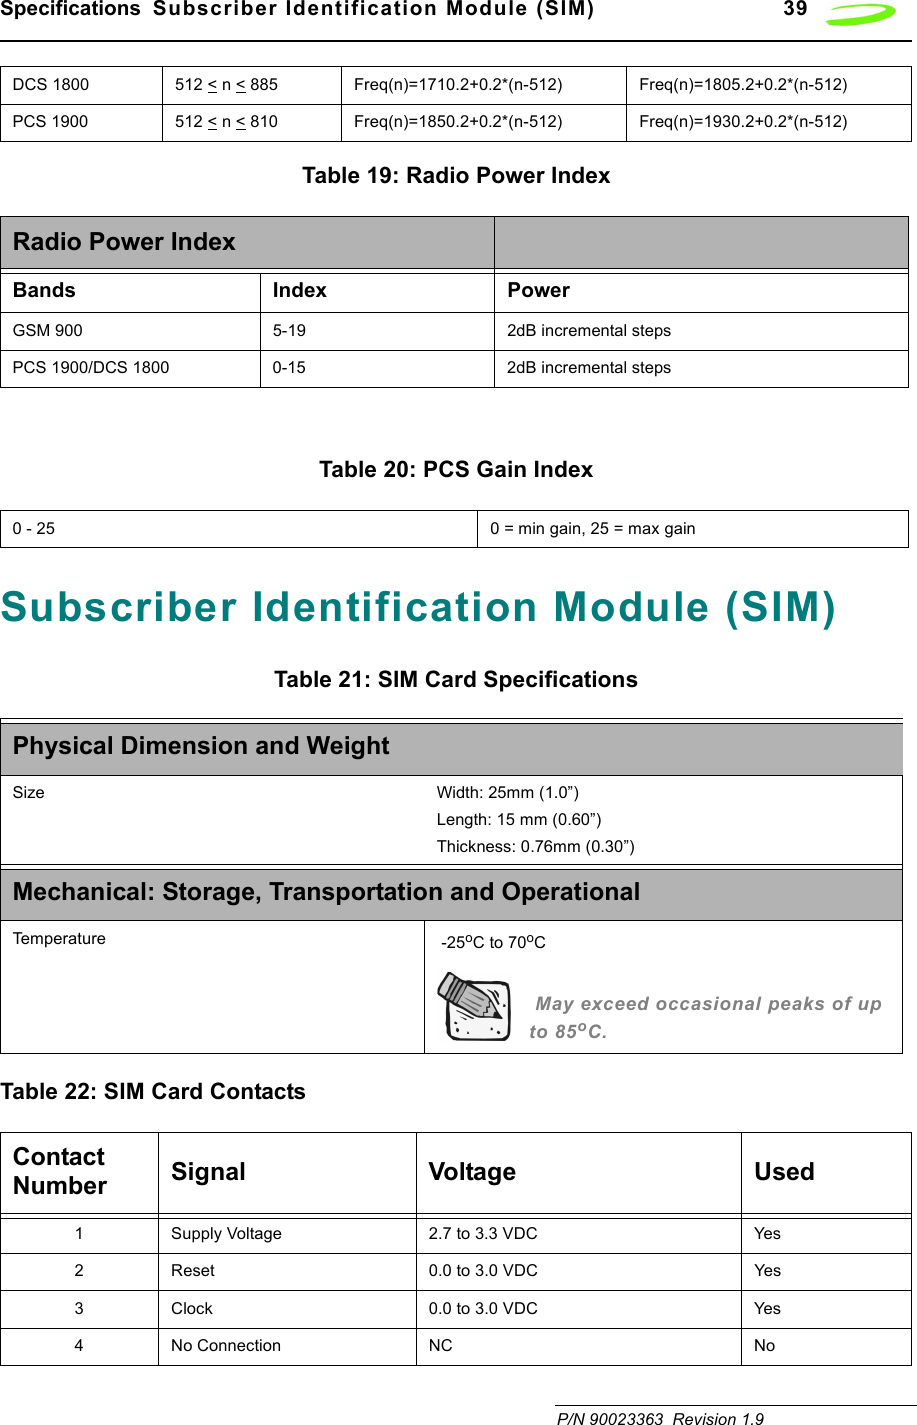 Specifications  Subscriber Identification Module (SIM) 39 P/N 90023363  Revision 1.9Table 19: Radio Power IndexTable 20: PCS Gain IndexSubscriber Identification Module (SIM)Table 21: SIM Card SpecificationsTable 22: SIM Card ContactsDCS 1800 512 &lt; n &lt; 885 Freq(n)=1710.2+0.2*(n-512) Freq(n)=1805.2+0.2*(n-512)PCS 1900 512 &lt; n &lt; 810 Freq(n)=1850.2+0.2*(n-512) Freq(n)=1930.2+0.2*(n-512)Radio Power IndexBands Index PowerGSM 900 5-19 2dB incremental stepsPCS 1900/DCS 1800 0-15 2dB incremental steps0 - 25 0 = min gain, 25 = max gainPhysical Dimension and WeightSize Width: 25mm (1.0”)Length: 15 mm (0.60”)Thickness: 0.76mm (0.30”)Mechanical: Storage, Transportation and OperationalTemperature  -25oC to 70oC May exceed occasional peaks of up to 85oC.Contact Number Signal Voltage Used1 Supply Voltage 2.7 to 3.3 VDC Yes2 Reset 0.0 to 3.0 VDC Yes3 Clock 0.0 to 3.0 VDC Yes4 No Connection NC No